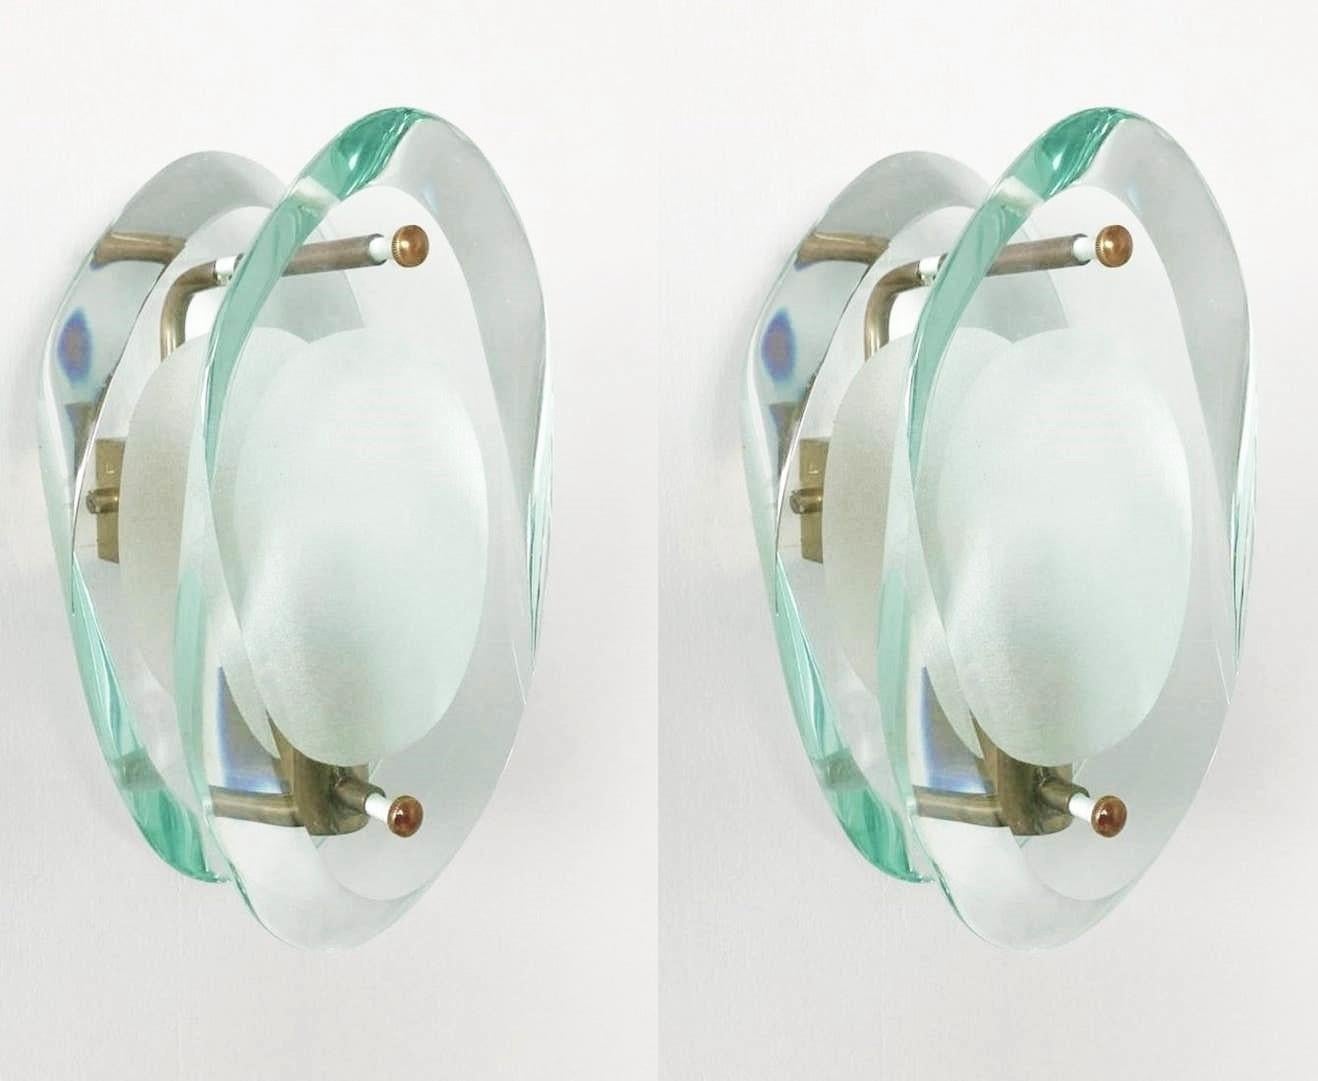 A pair of light sconces by Max Ingrand for Fontana Arte, Model 2093, Italy, 1960-1961. Organically shaped double lens cut panels of of thick profiled polished Murano glass with sandblasted centers, brass mounted. The Model 2093 is one of the iconic